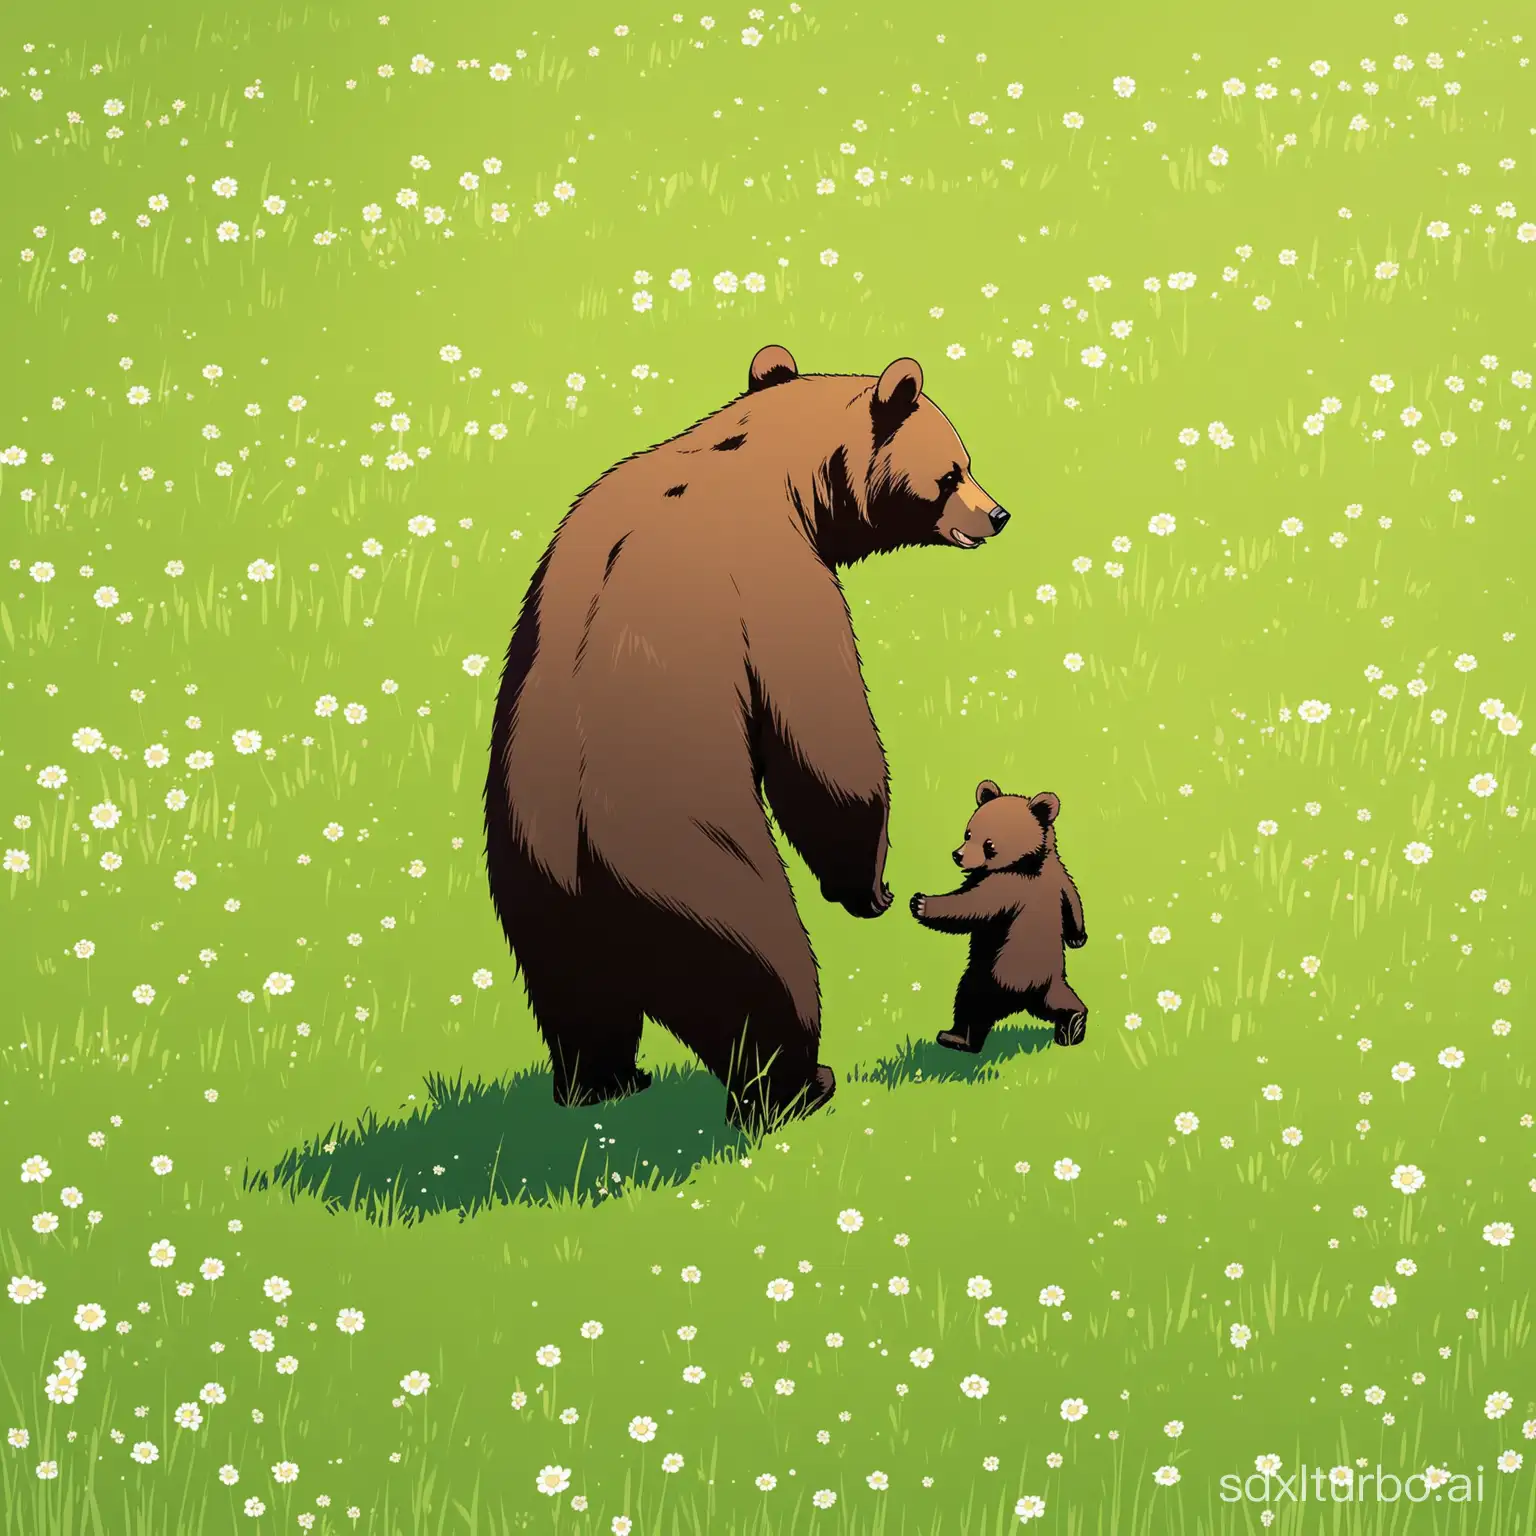 Mother-Bear-and-Cub-Encounter-Human-Hunter-in-Grass-Field